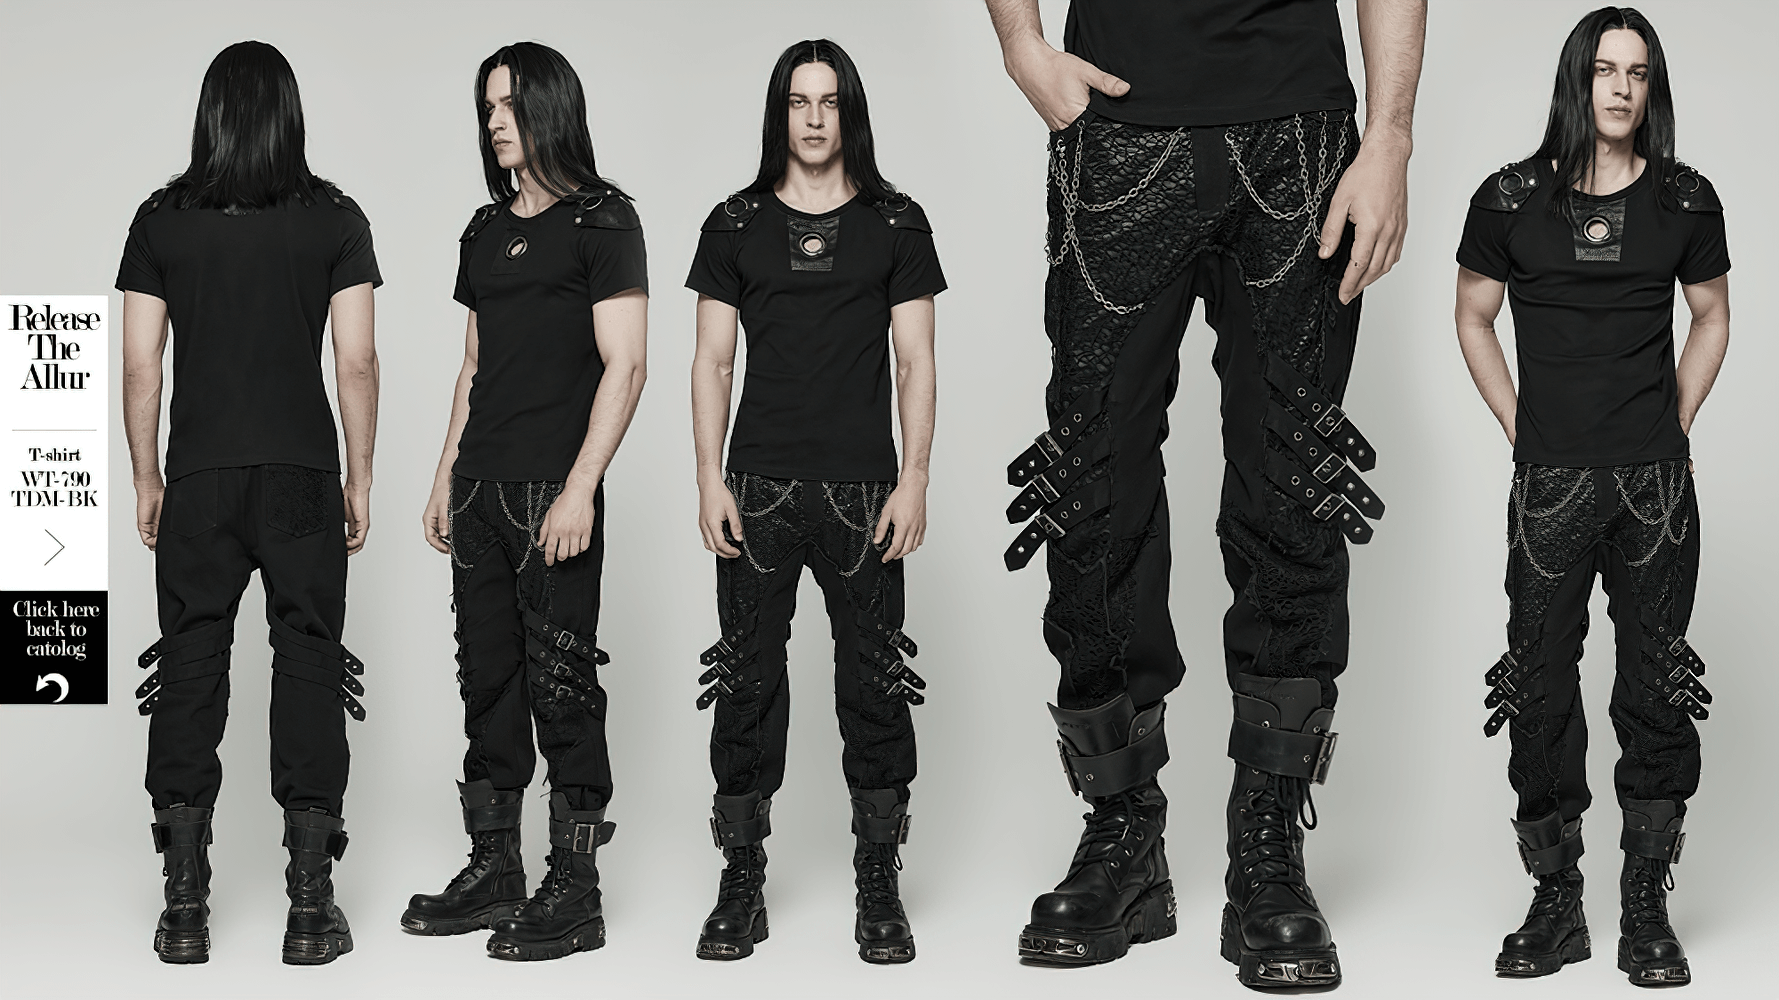 Edgy Gothic Black Trousers With Buckles And Chains Accent